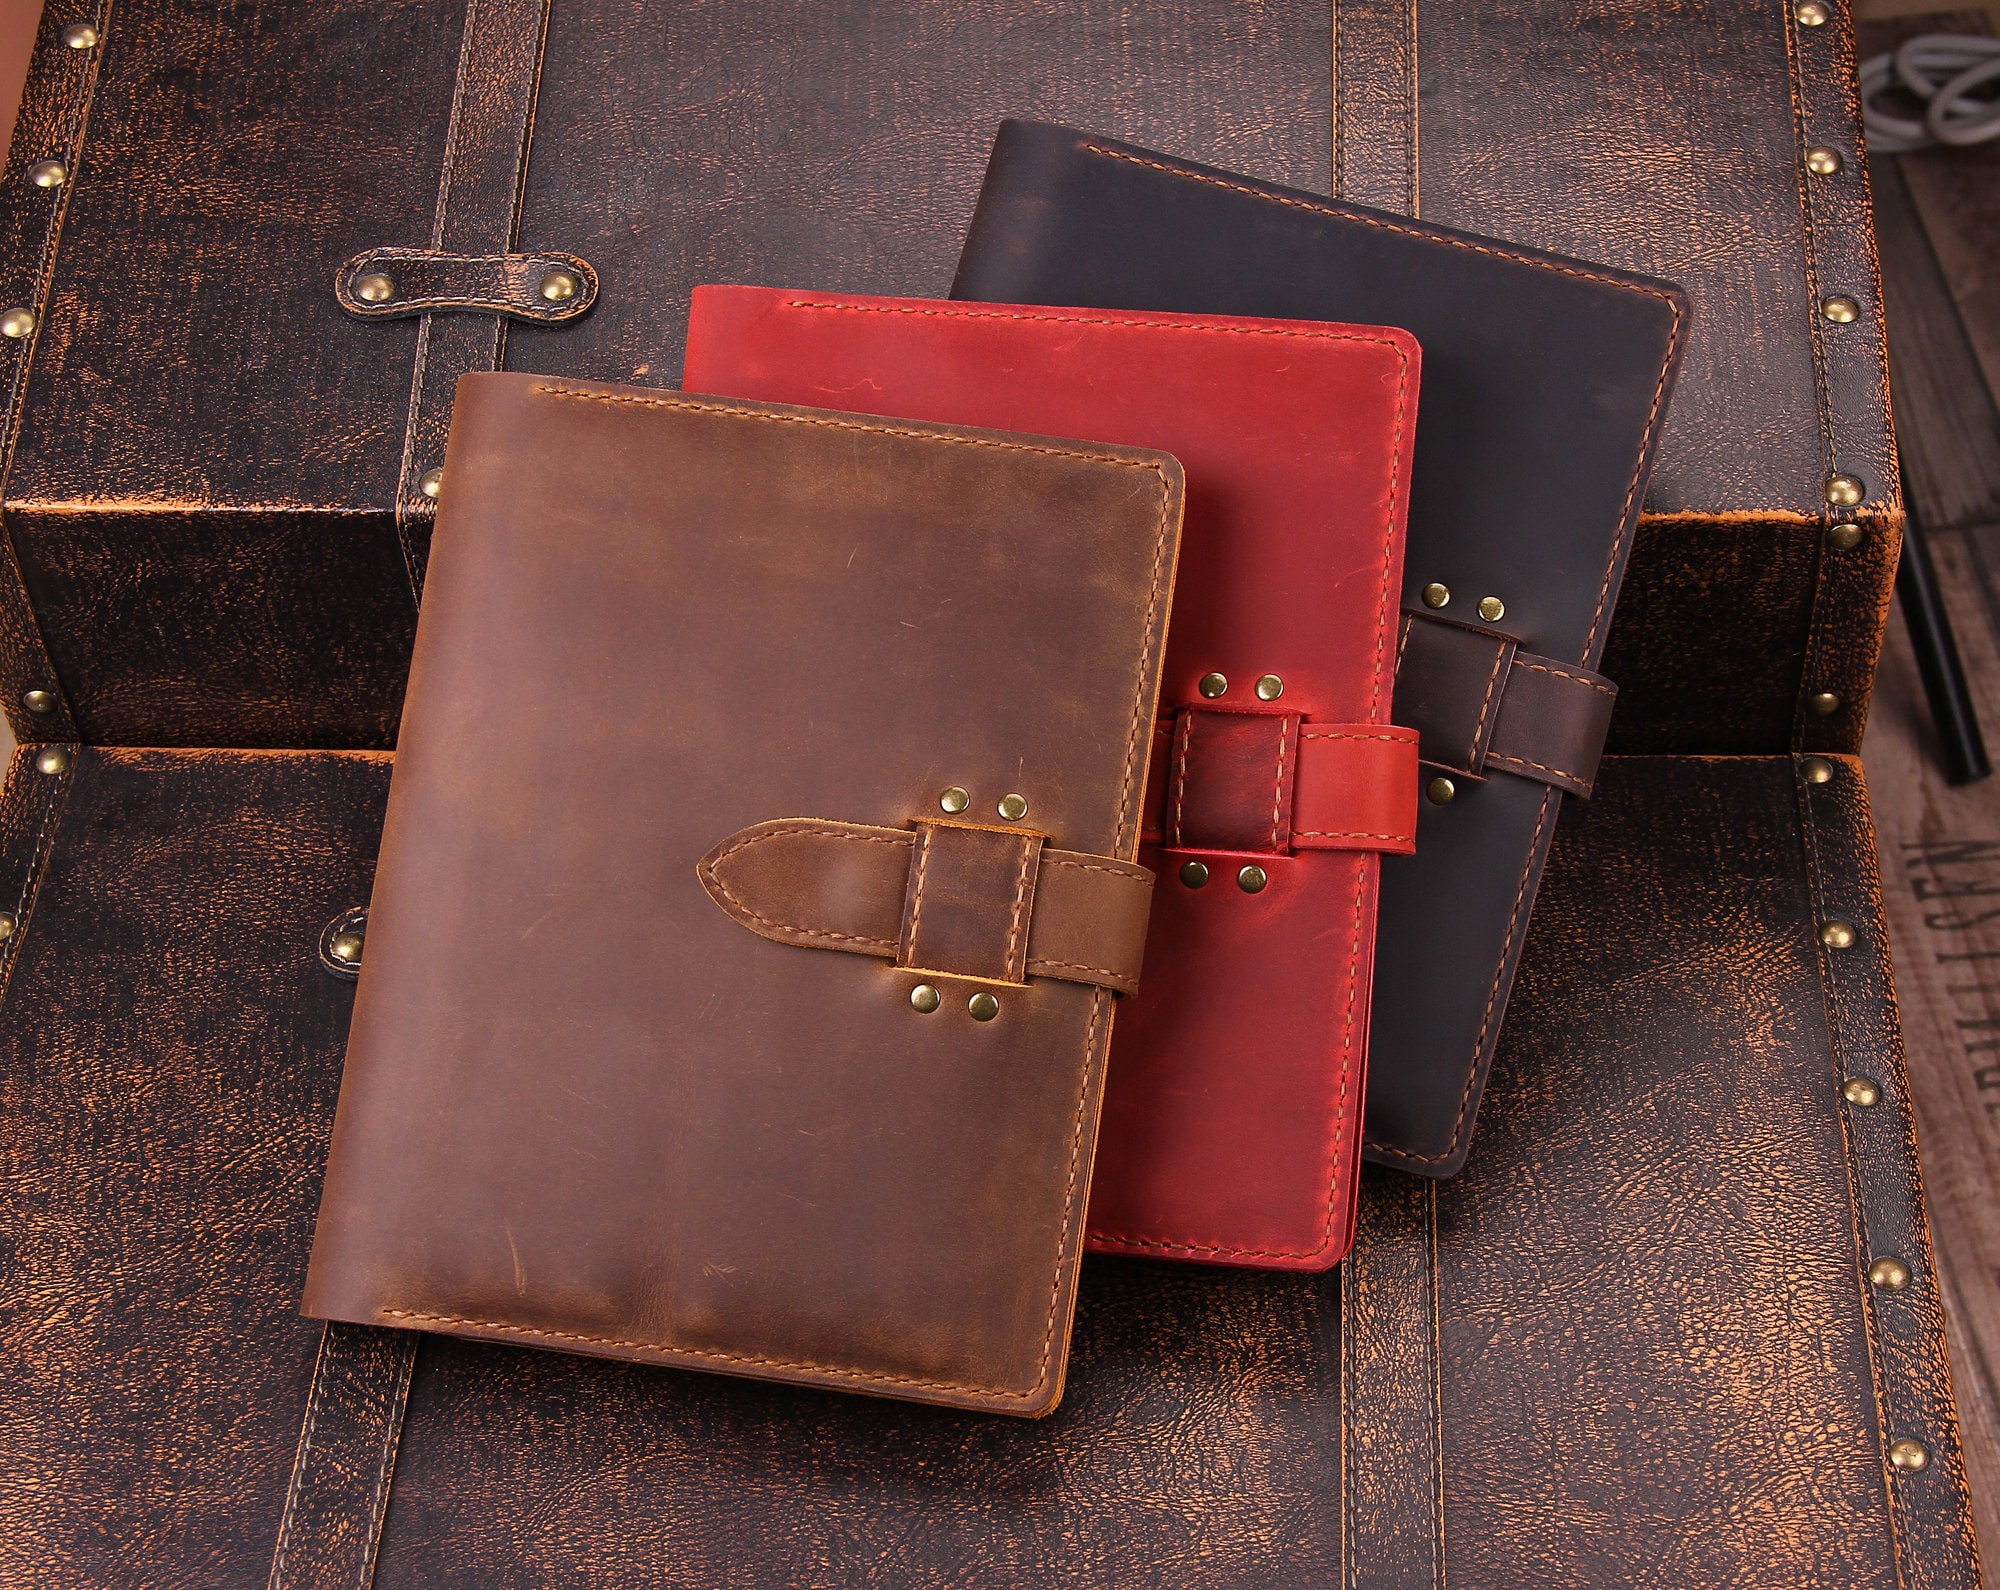 Personalized Leather Sketchbook Cover, Handmade Artist Sketch Pad